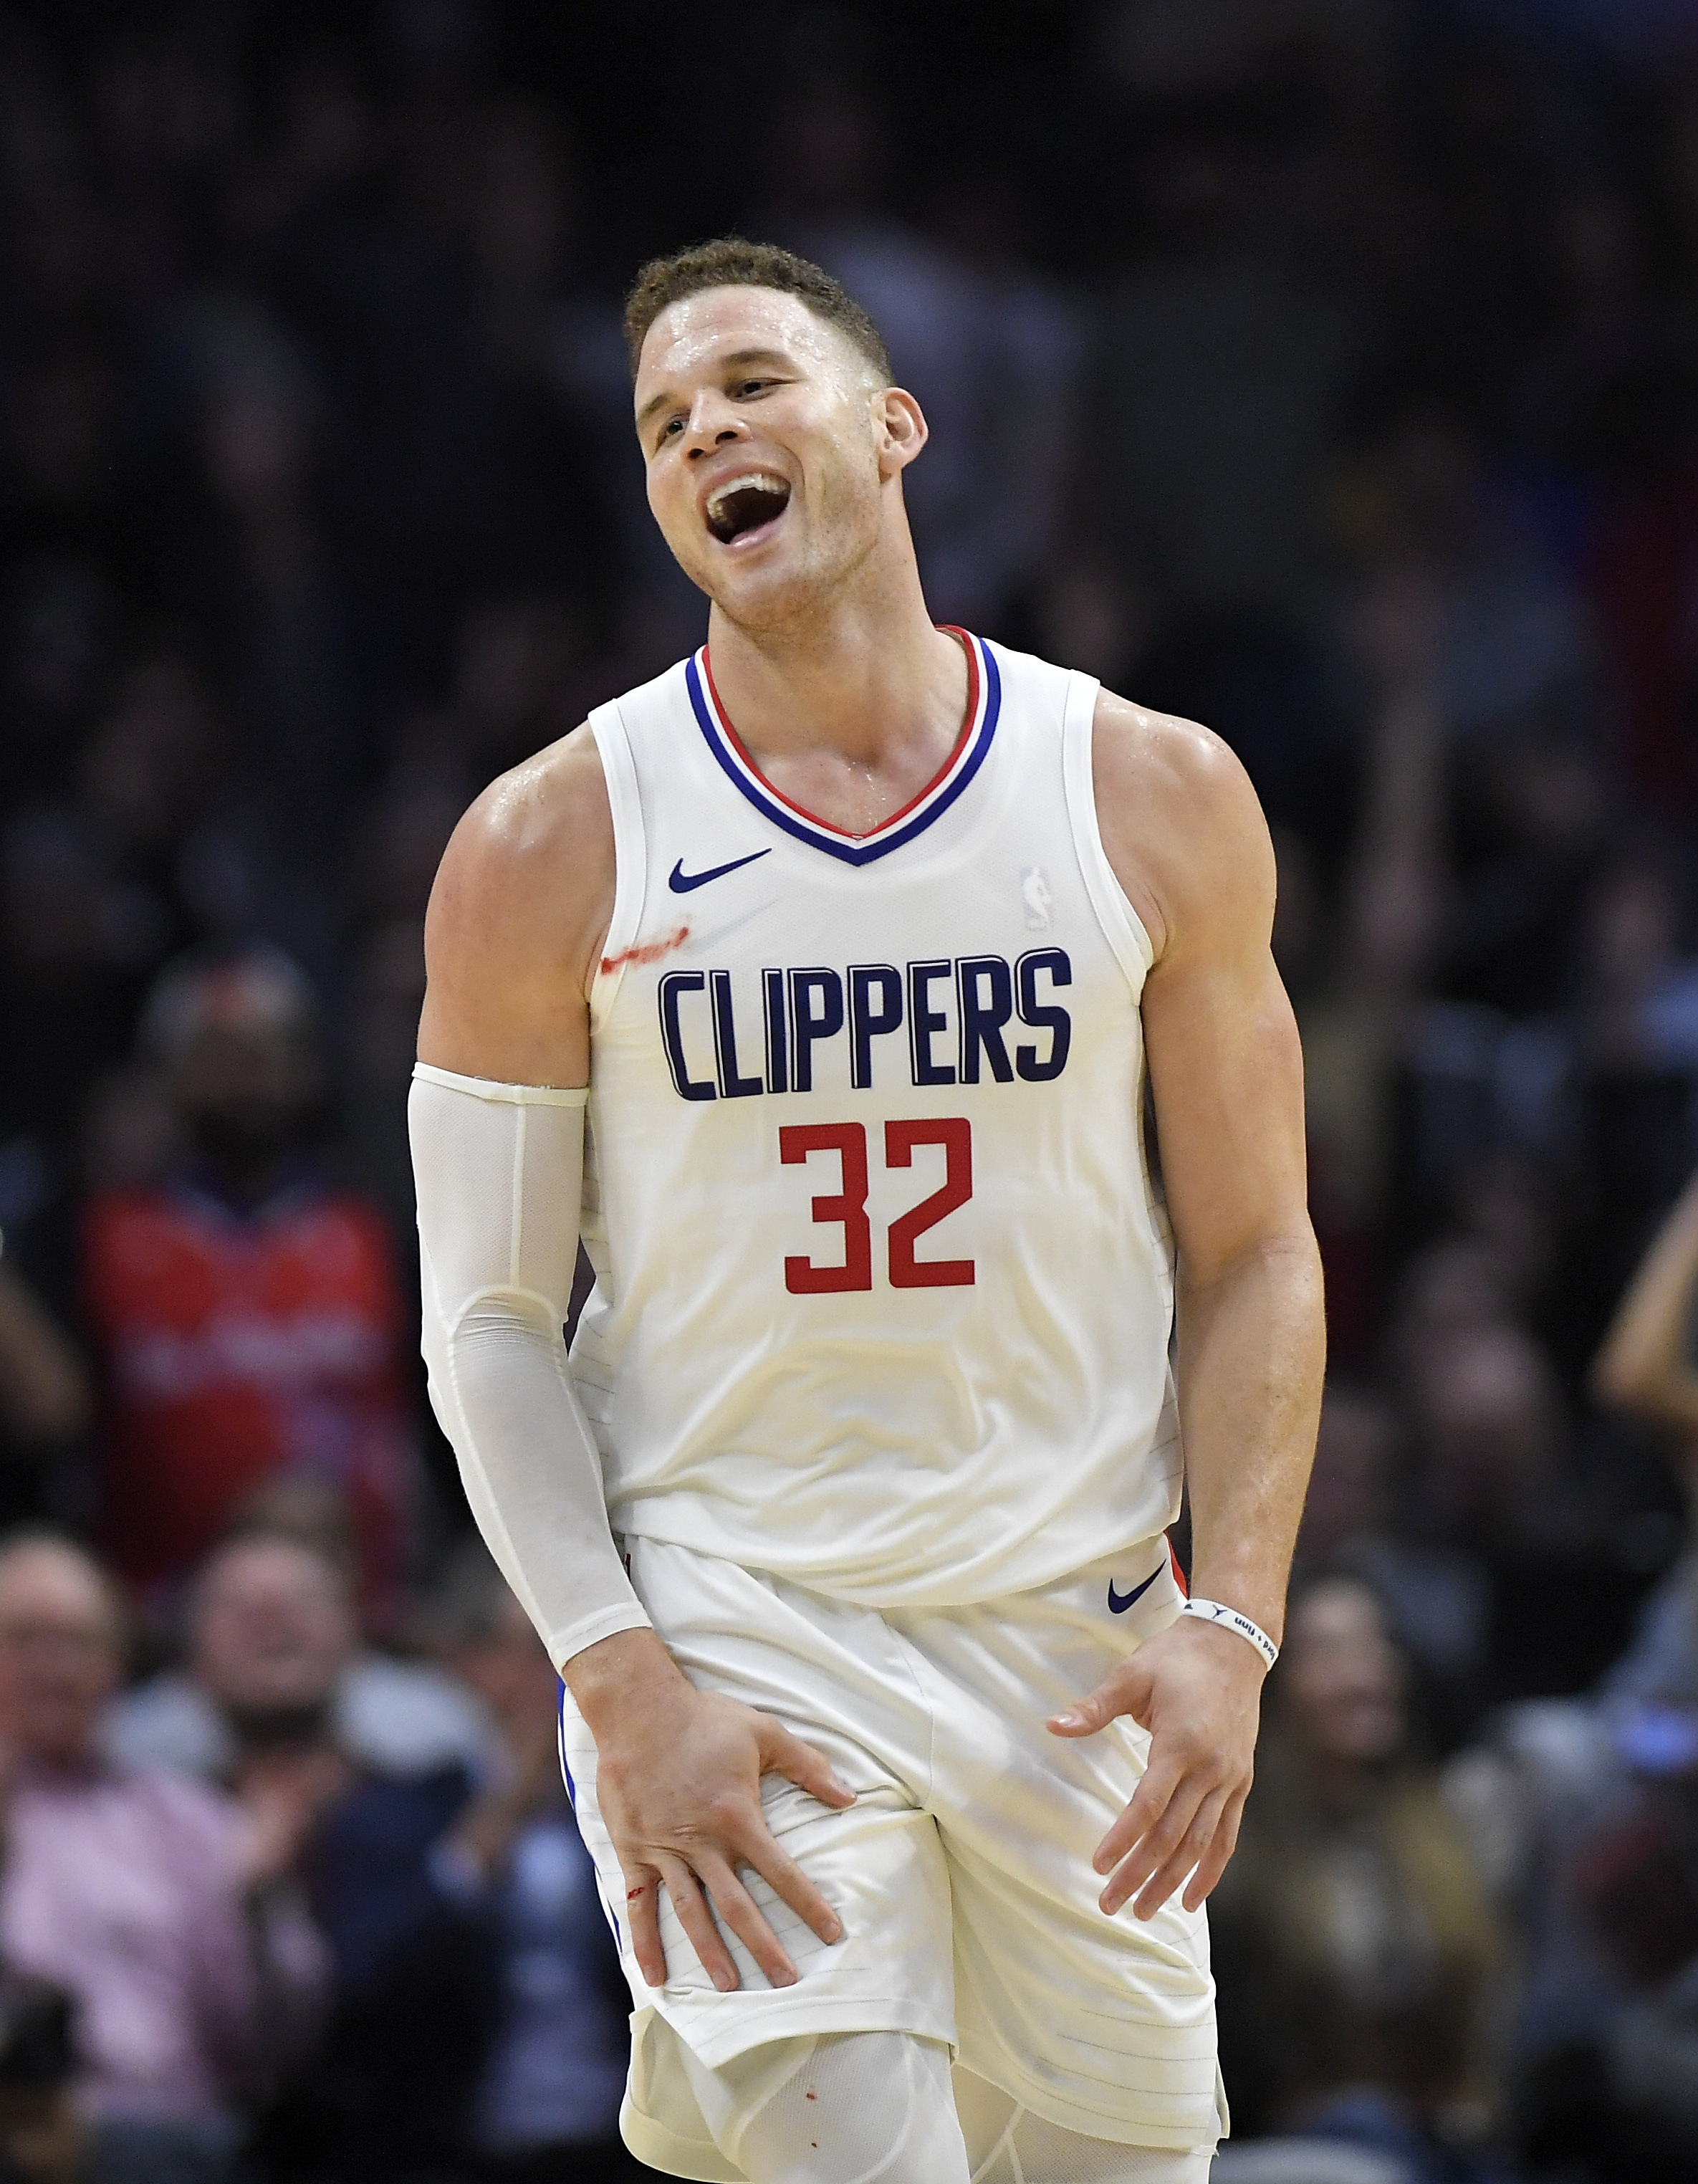 NBA: Blake Griffin improves game to aid Clippers